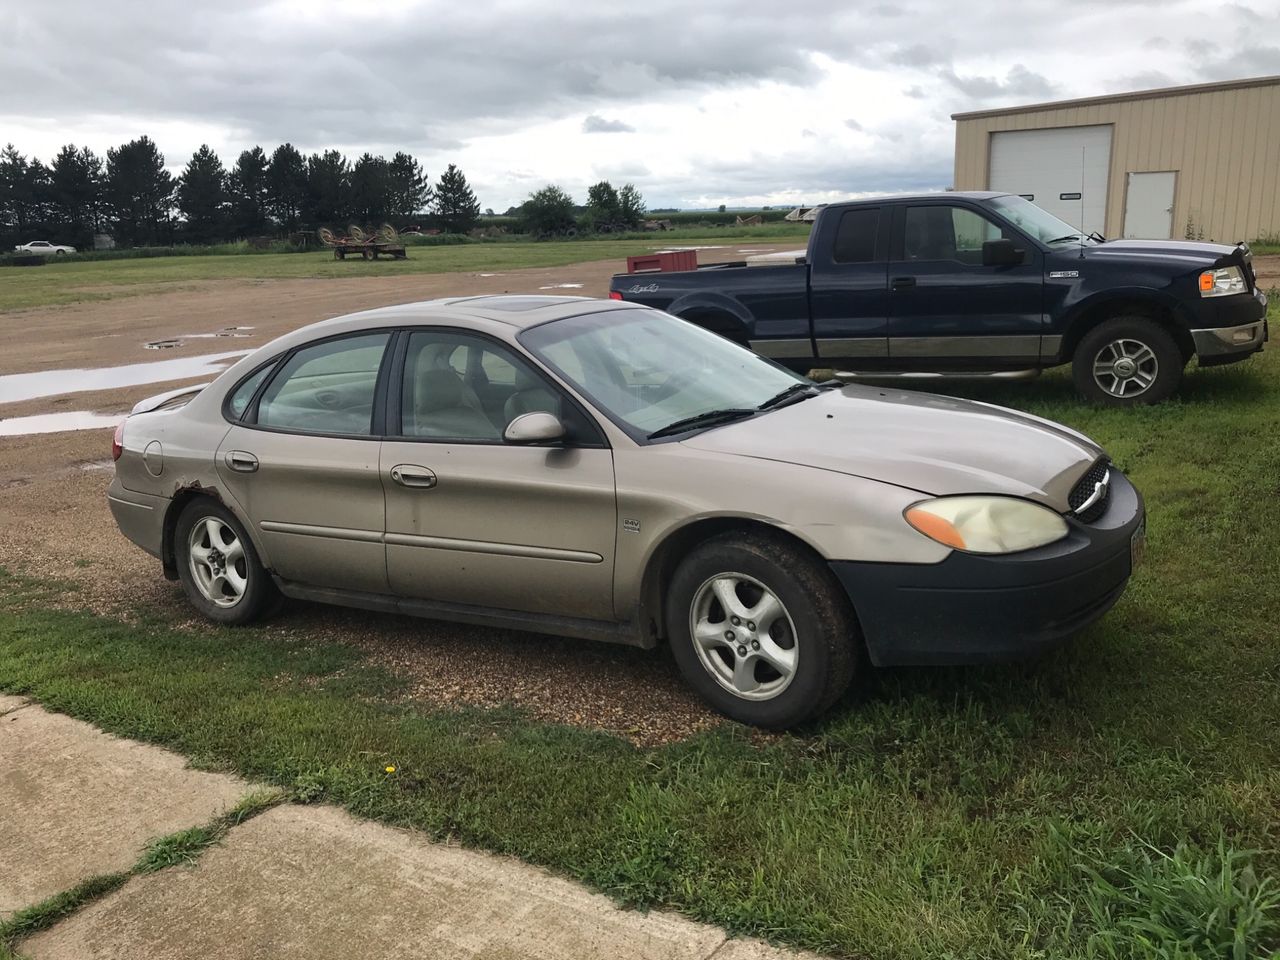 2001 Ford Taurus | Hurley, SD, Harvest Gold Clearcoat Metallic (Gold & Cream), Front Wheel